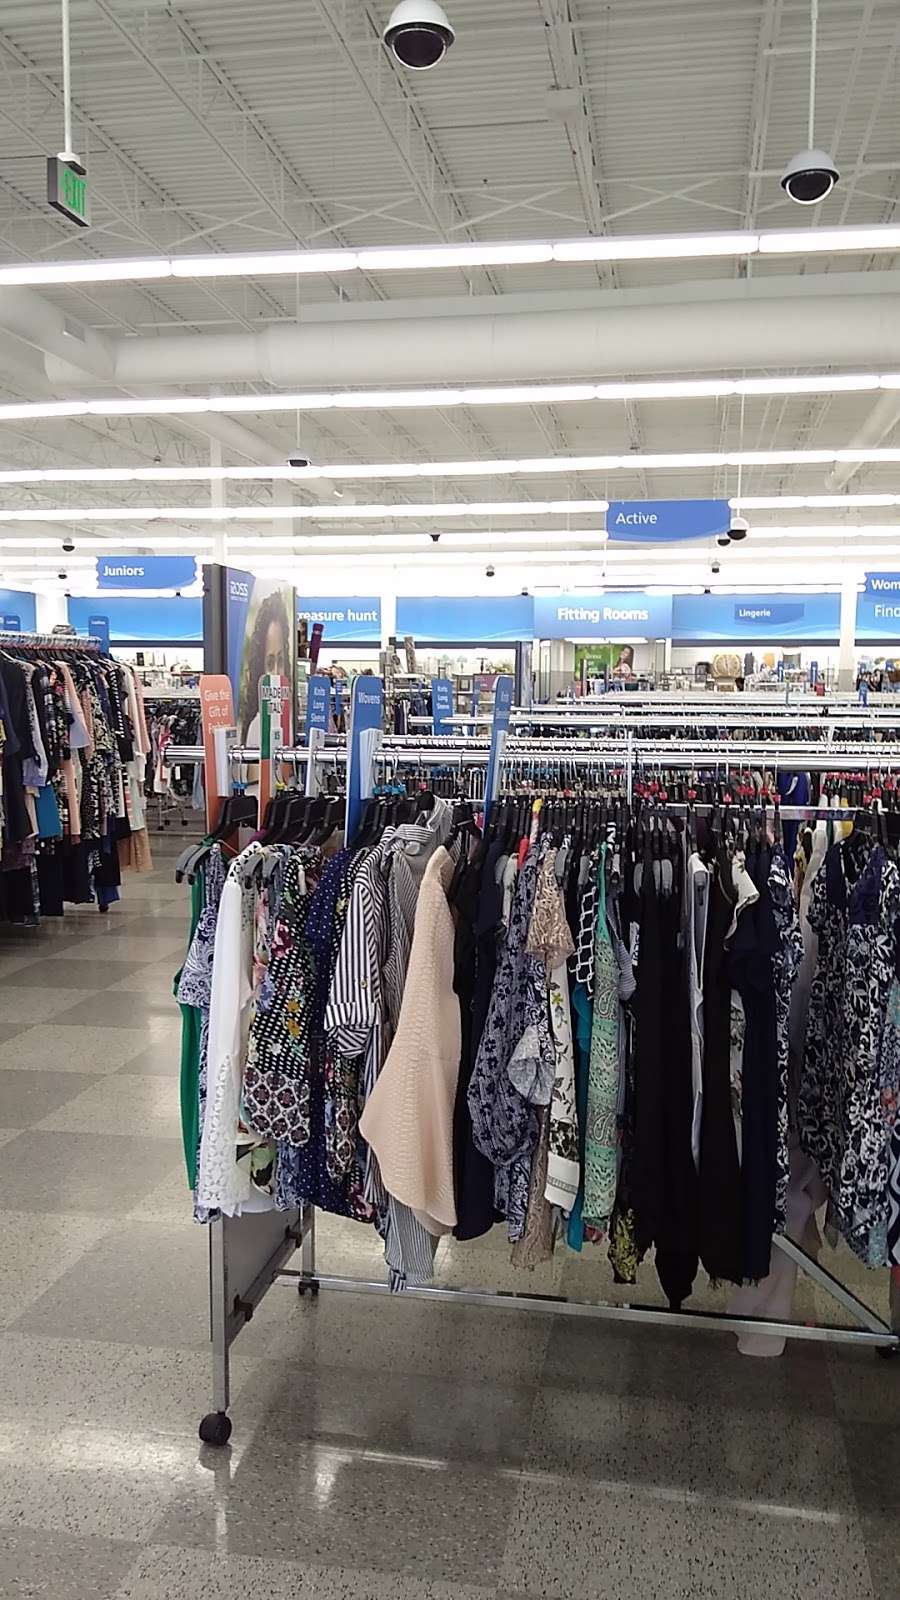 Ross Dress for Less | 10123 US-36, Avon, IN 46123, USA | Phone: (317) 209-9130